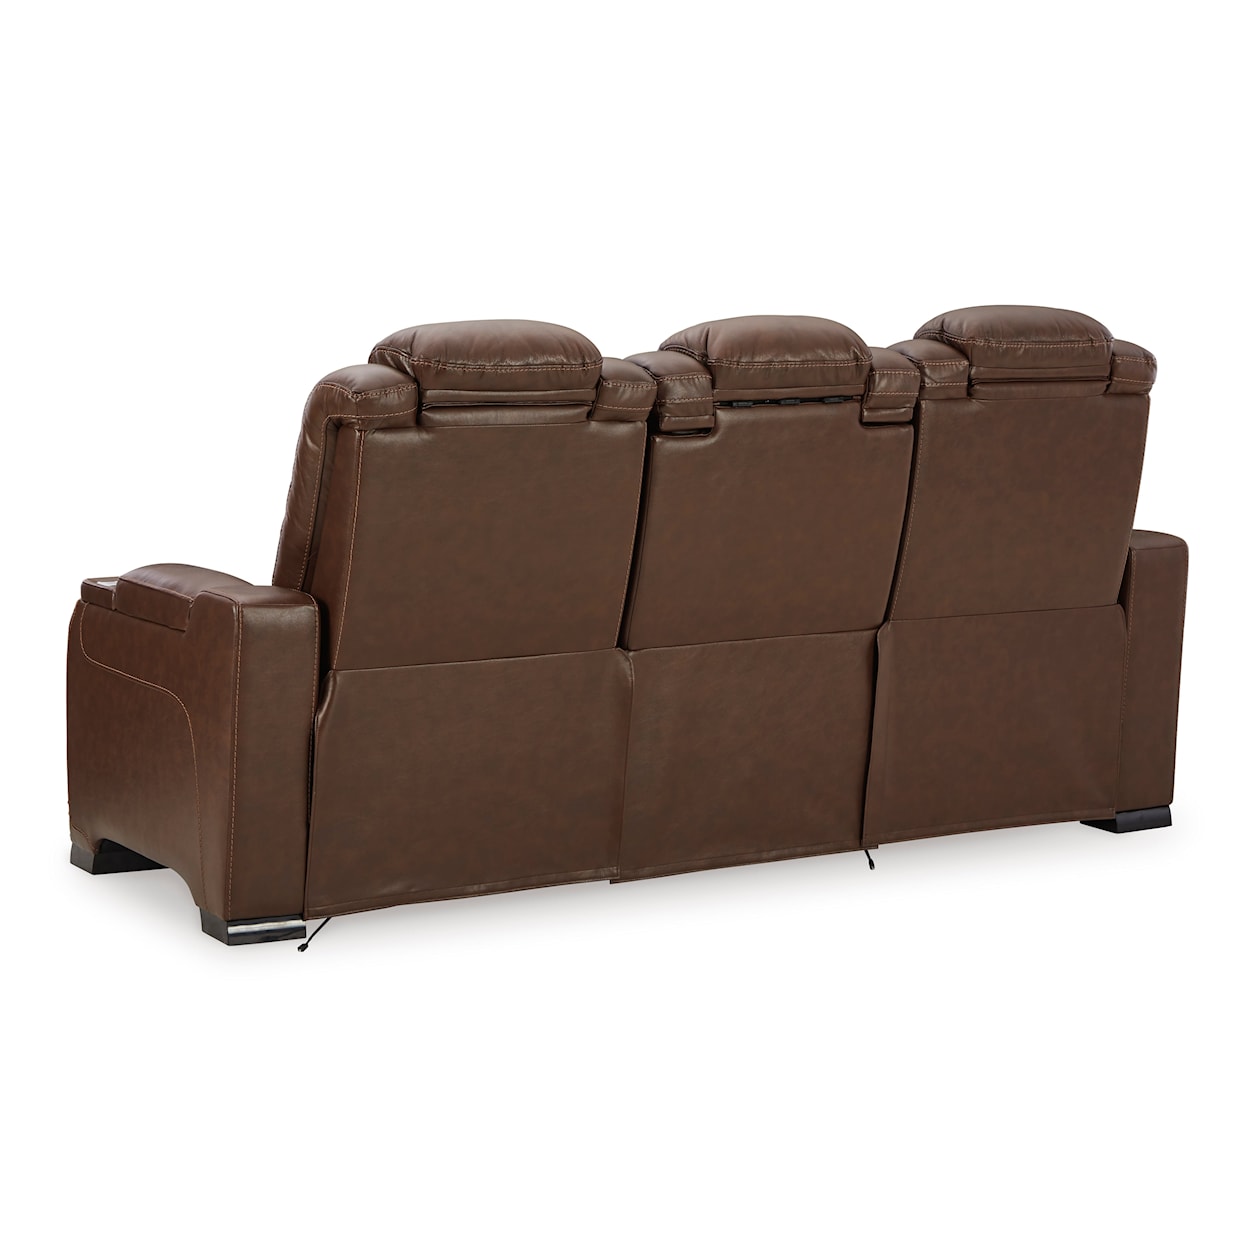 Signature Design by Ashley Furniture The Man-Den Power Reclining Sofa with Adj Headrests